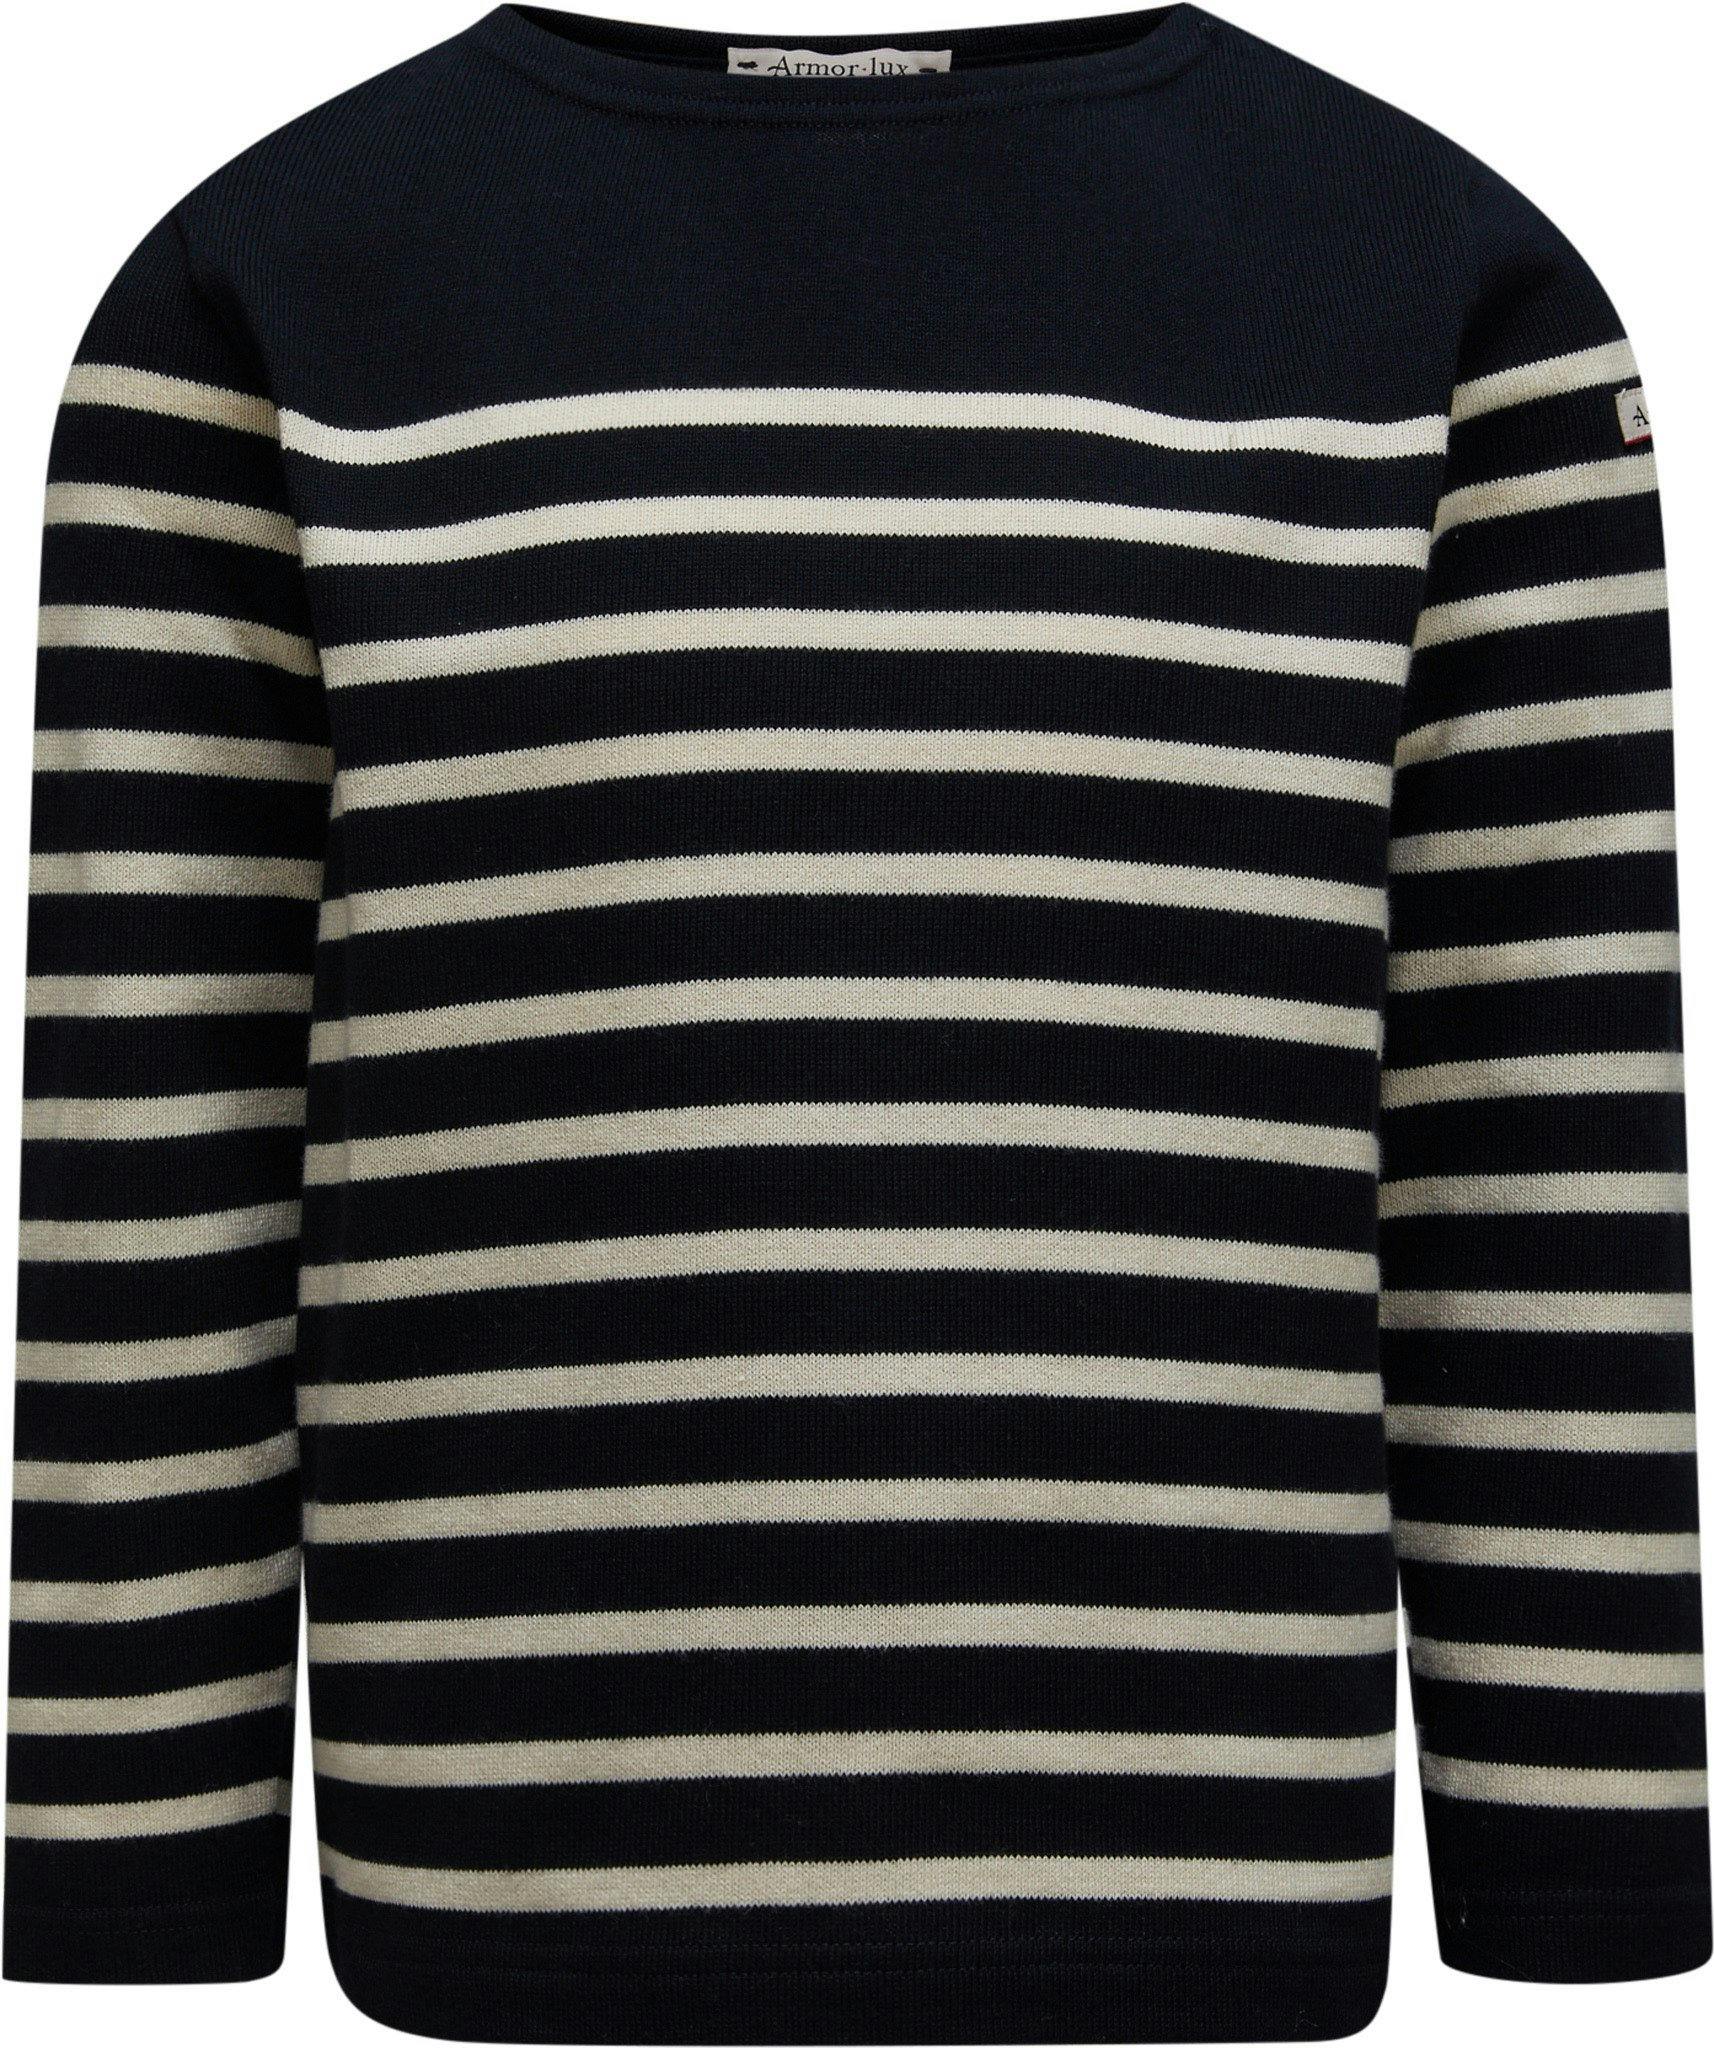 Product image for Drisse Breton Striped Jersey - Kids